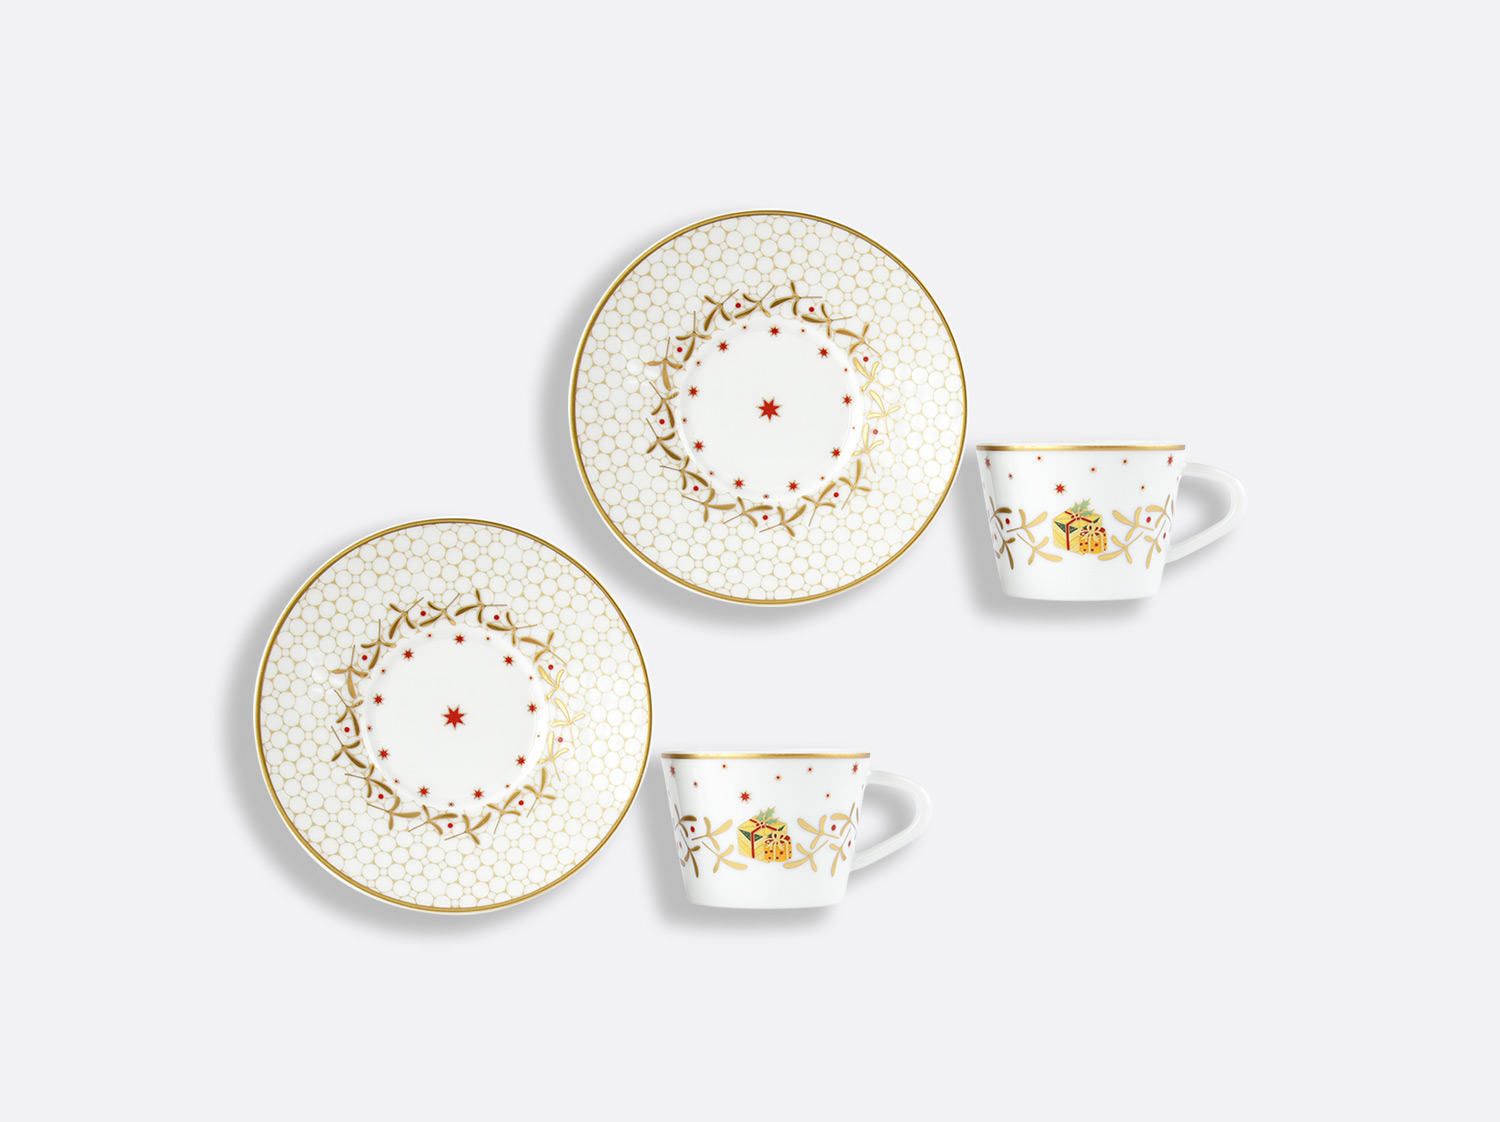 China Espresso cup and saucer gift box - 2.8 Oz - Set of 2 of the collection Noël | Bernardaud